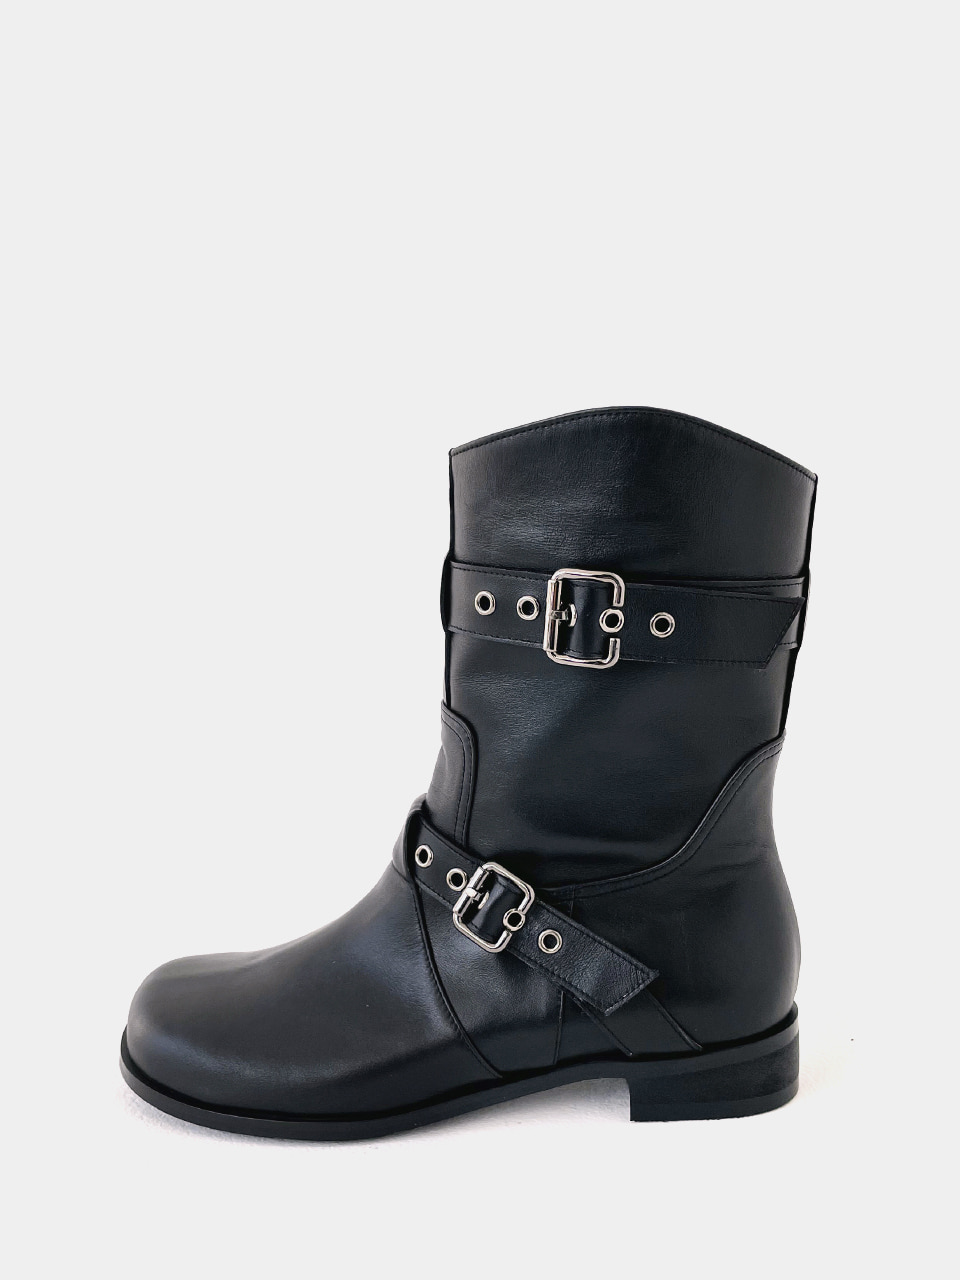 Mrc092 Nickel Middle Boots (Black)